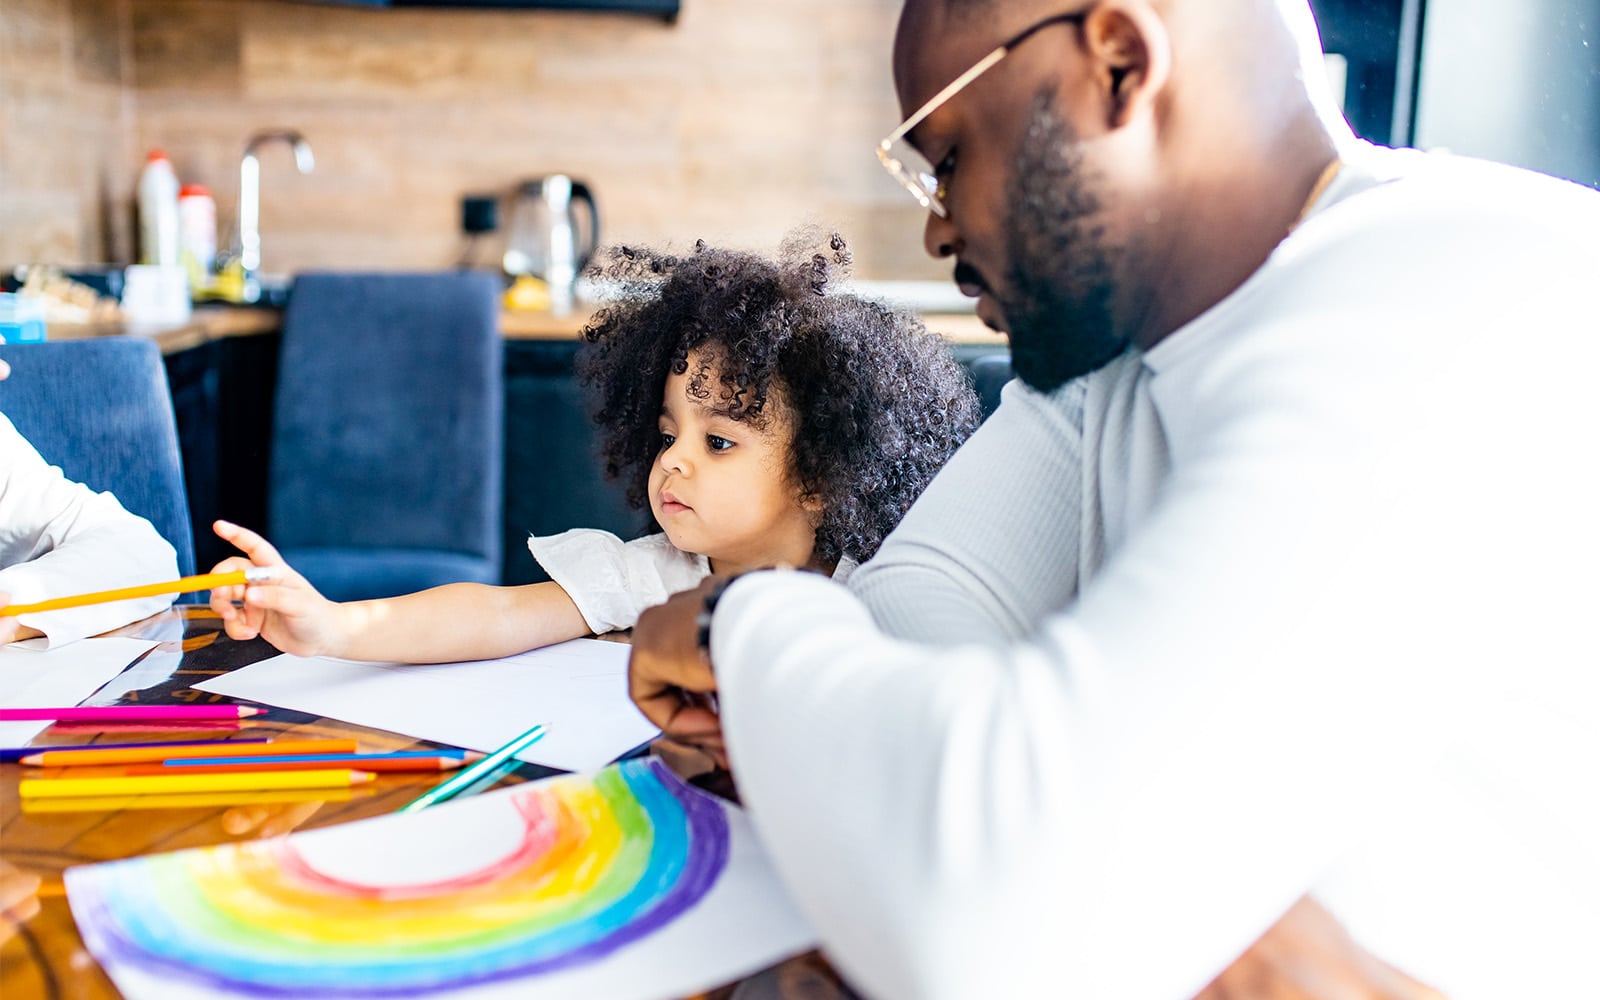 Image of a father painting rainbows with his daughter